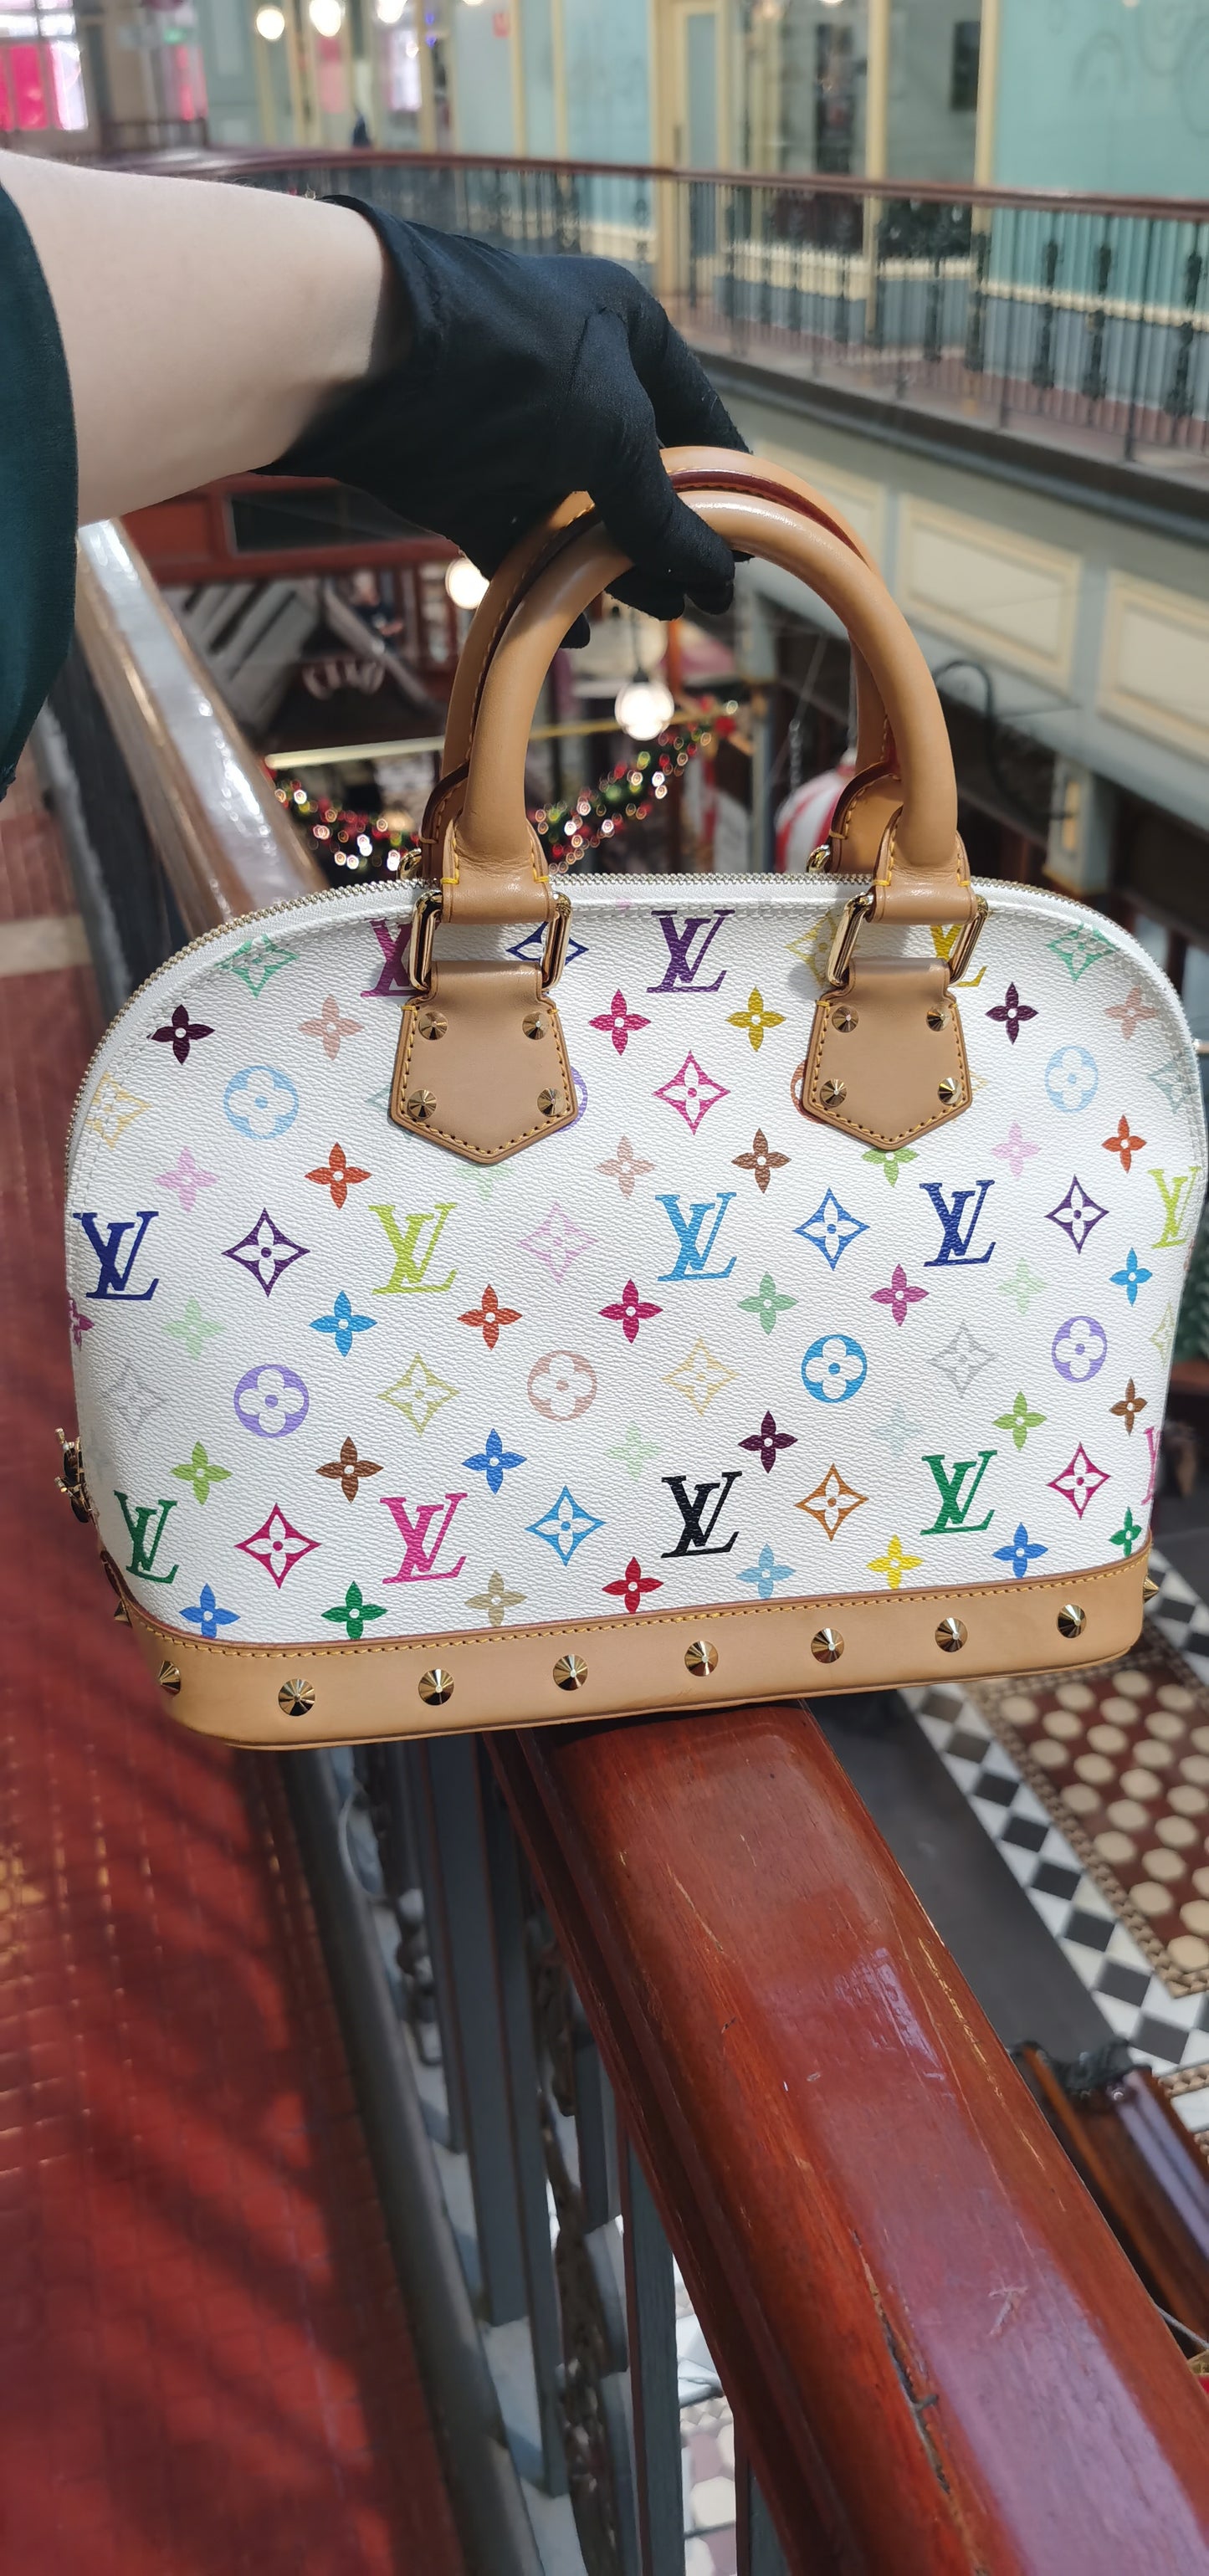 Authentic Louis Vuitton Alma Bag from SS 2003 Murakami Collection